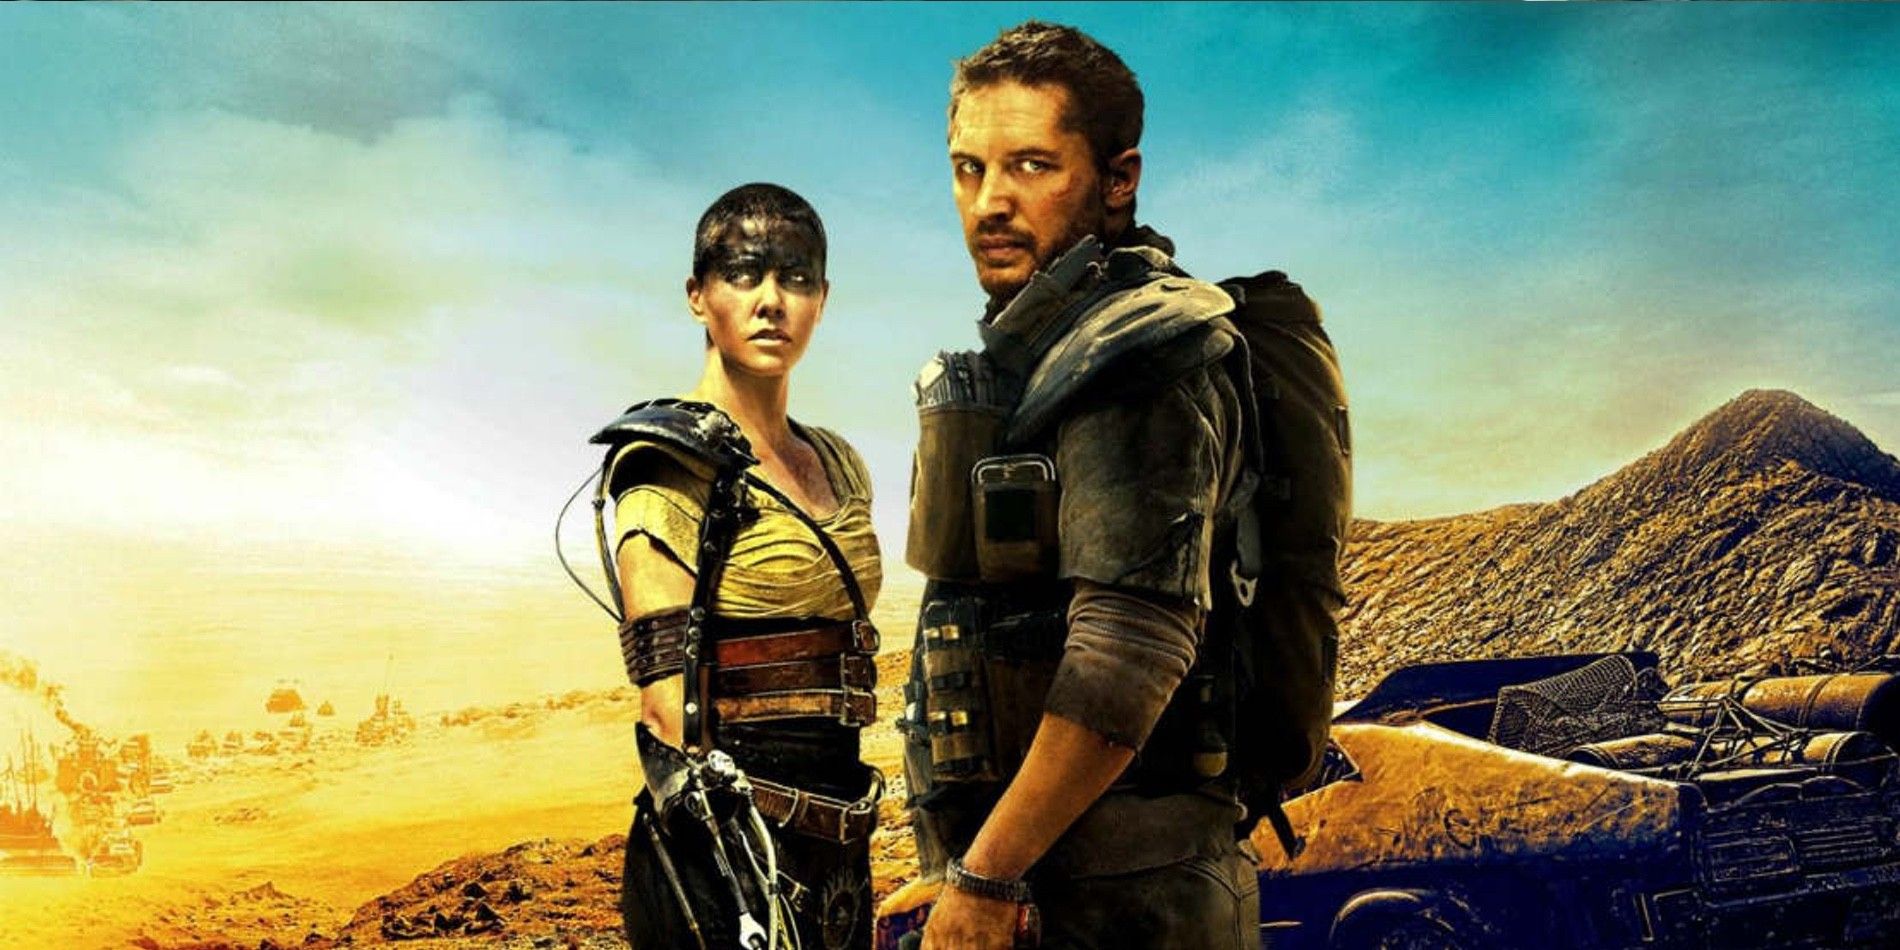 Tom Hardy as Max and Charlize Theron as Furiosa in Mad Max Fury Road